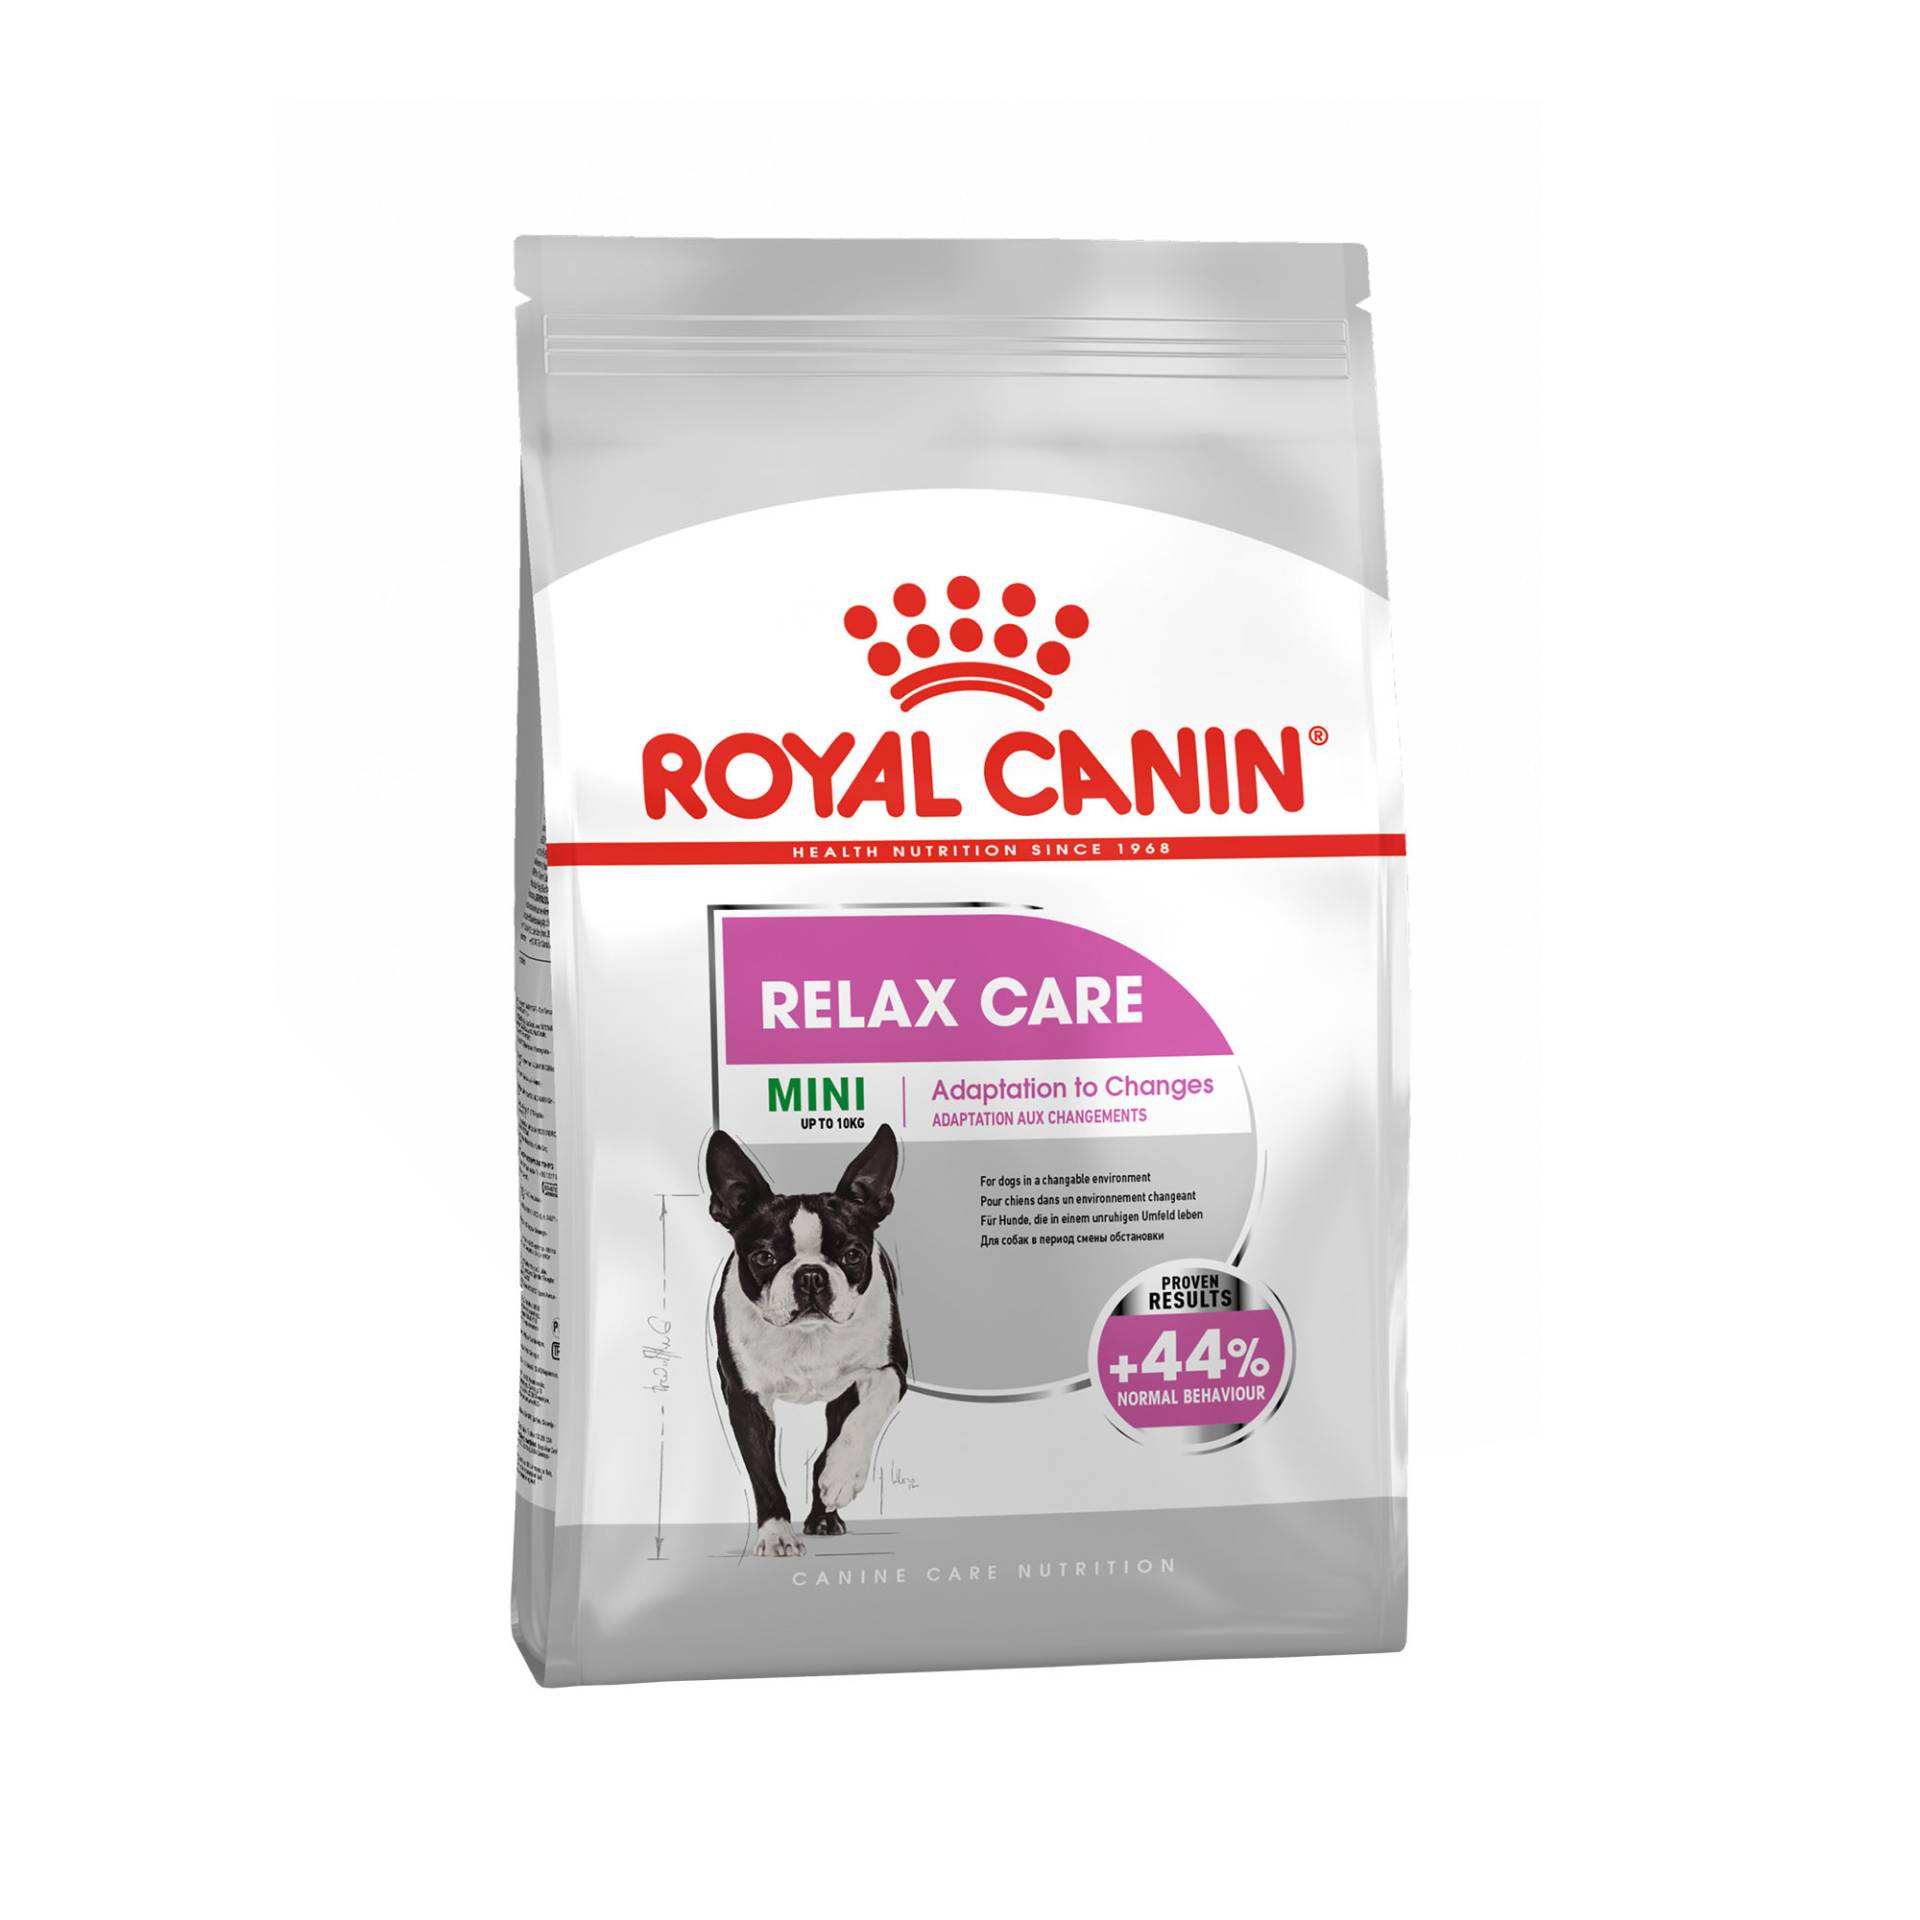 Royal Canin Mini Relax Care Hundefutter - 8 kg von Royal Canin